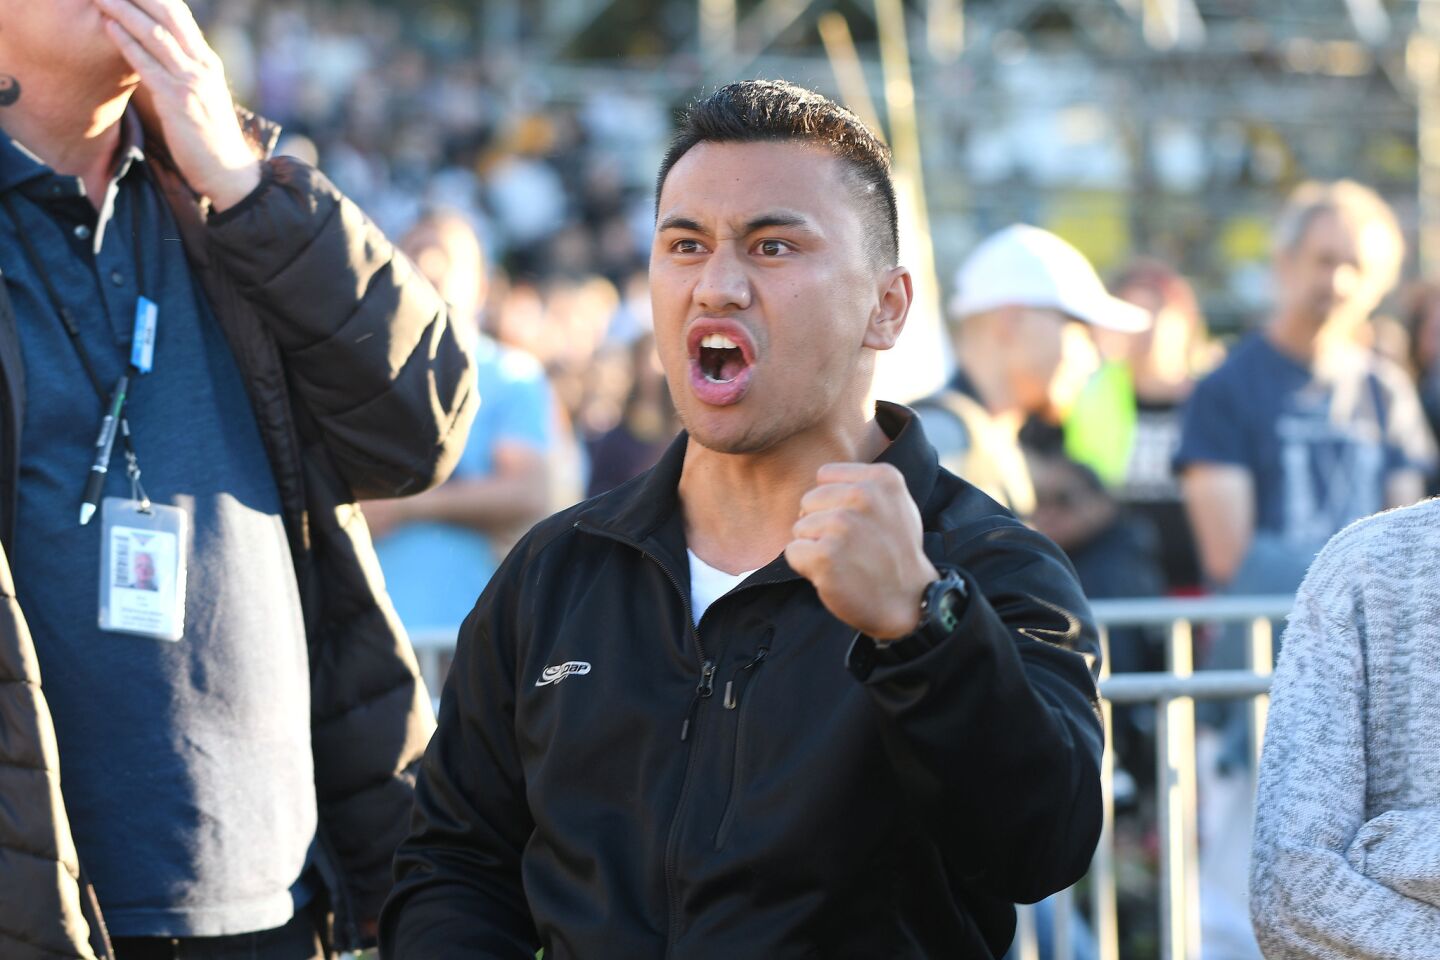 A man reacts during a vigil Sunday at the Basin Reserve in Wellington, New Zealand.